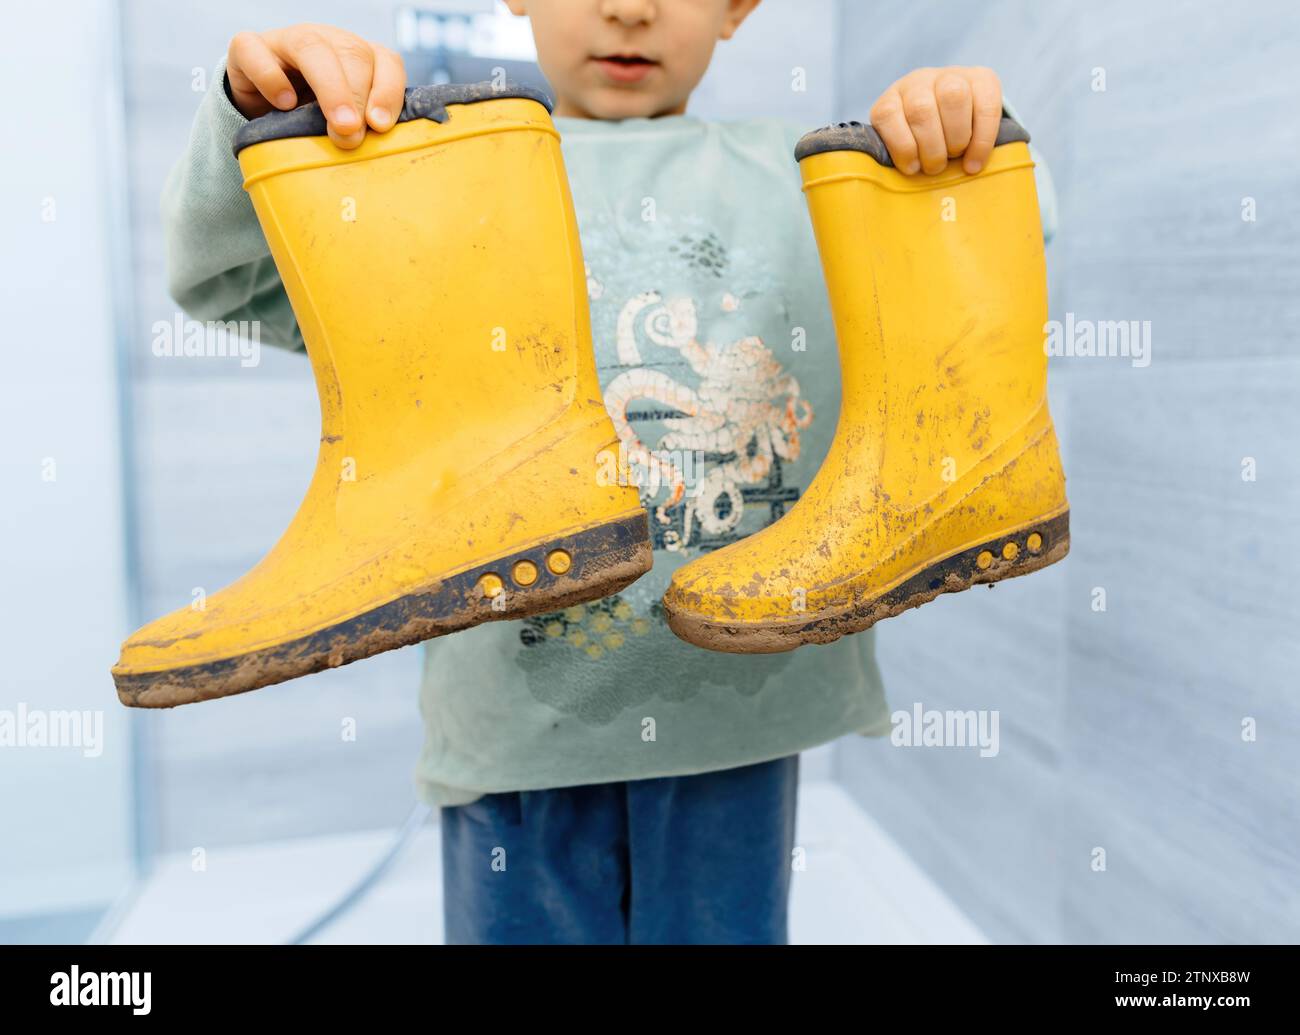 Toddler proudly displaying dirty, mud-covered rubber shoes after an adventurous trail march, showcasing outdoor play Stock Photo